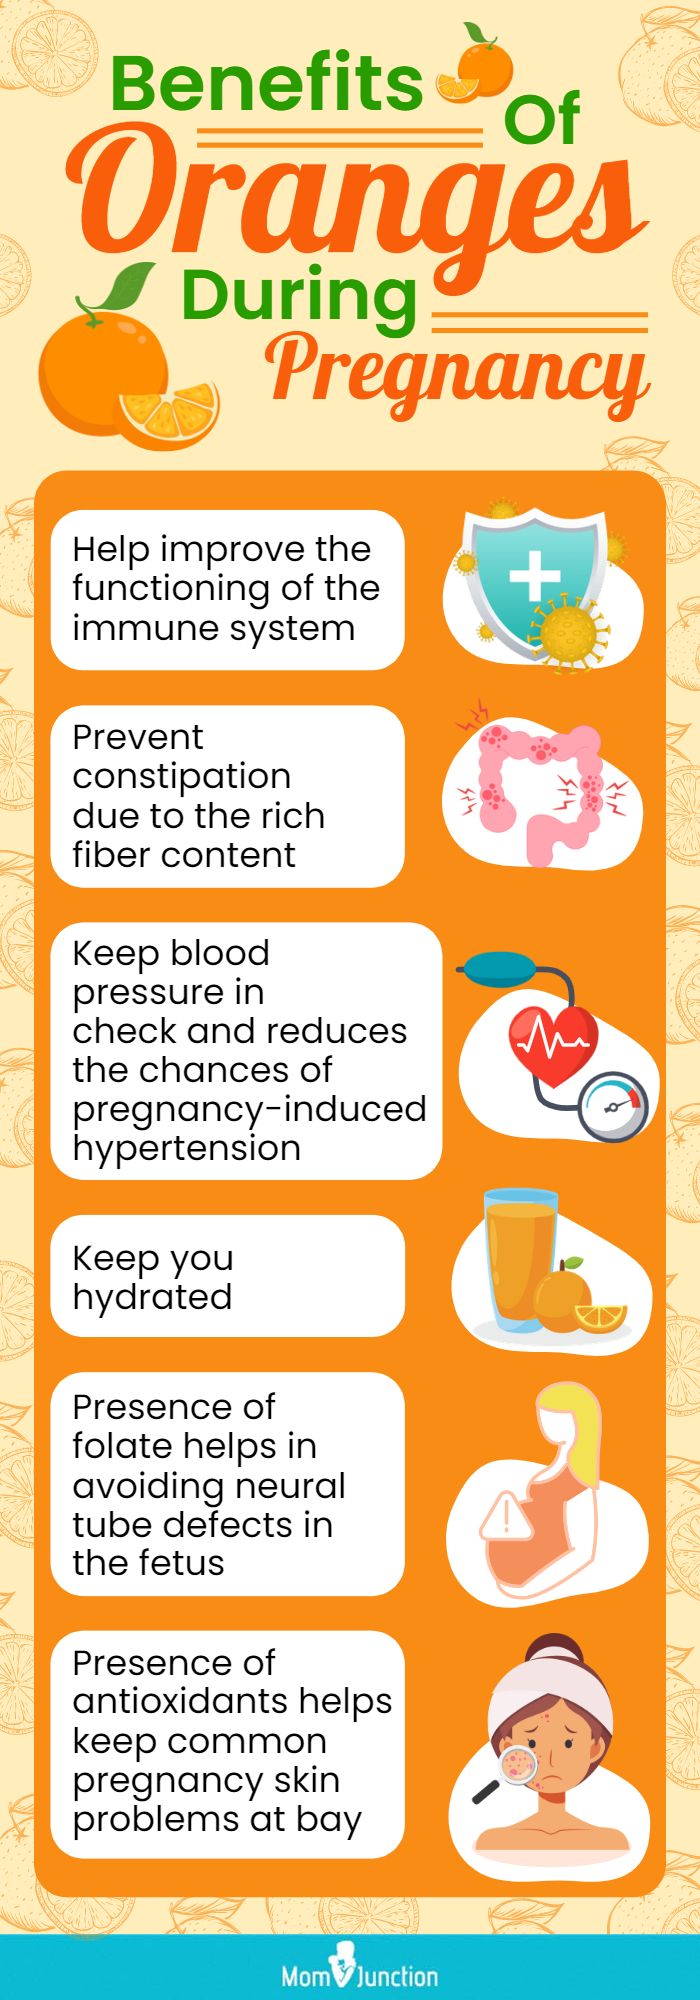 benefits of oranges during pregnancy (infographic)